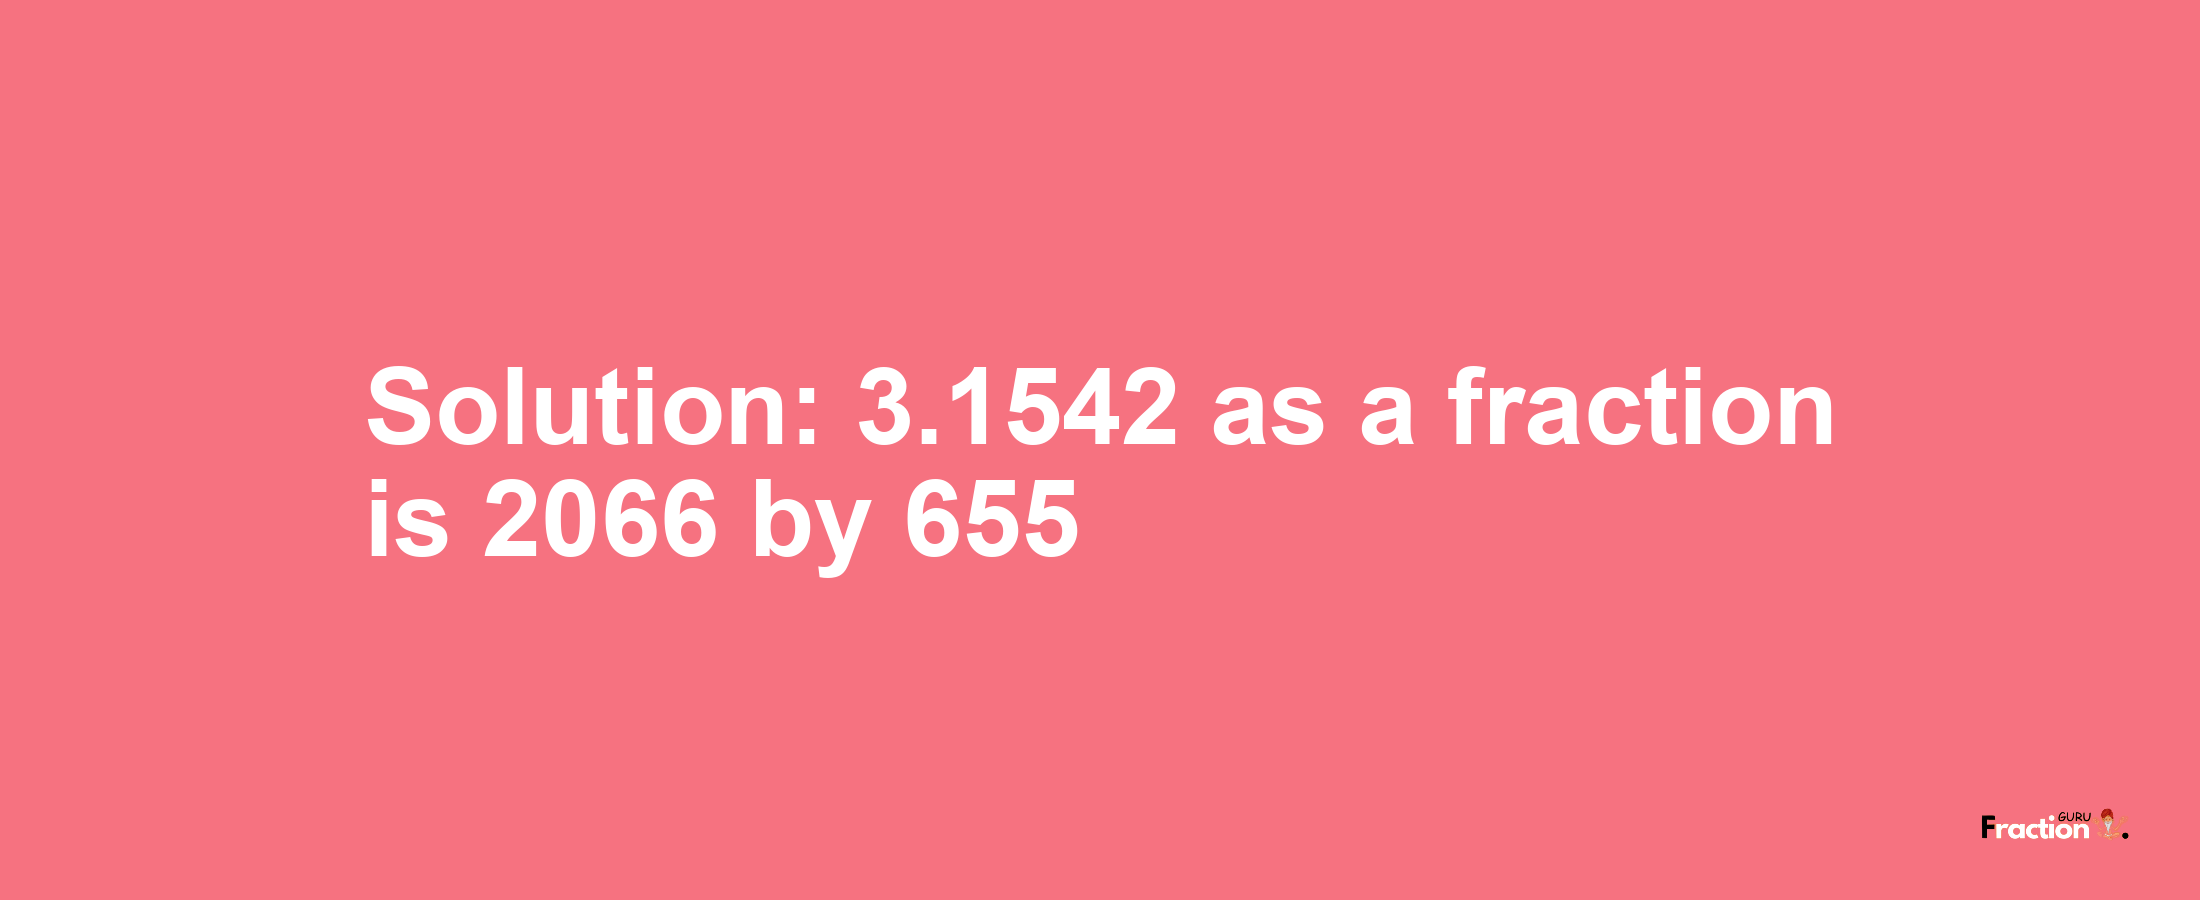 Solution:3.1542 as a fraction is 2066/655